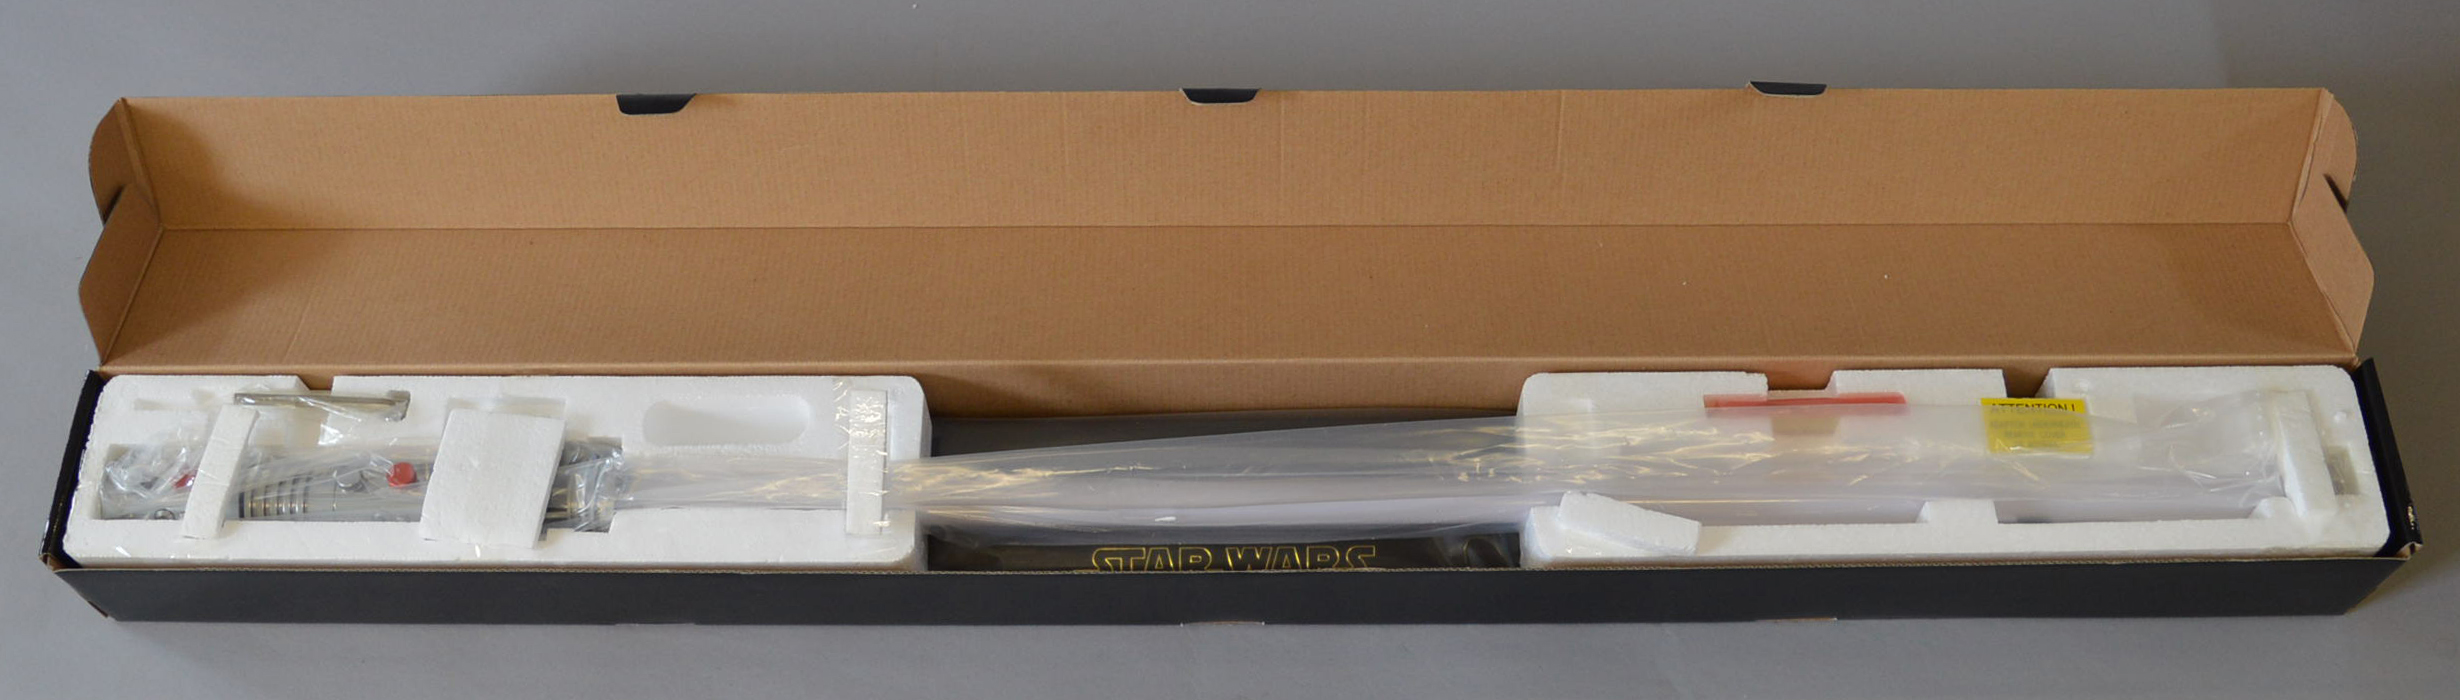 Star Wars. Master Replicas. Darth Maul force FX lightsaber appears VG, with shipping carton.